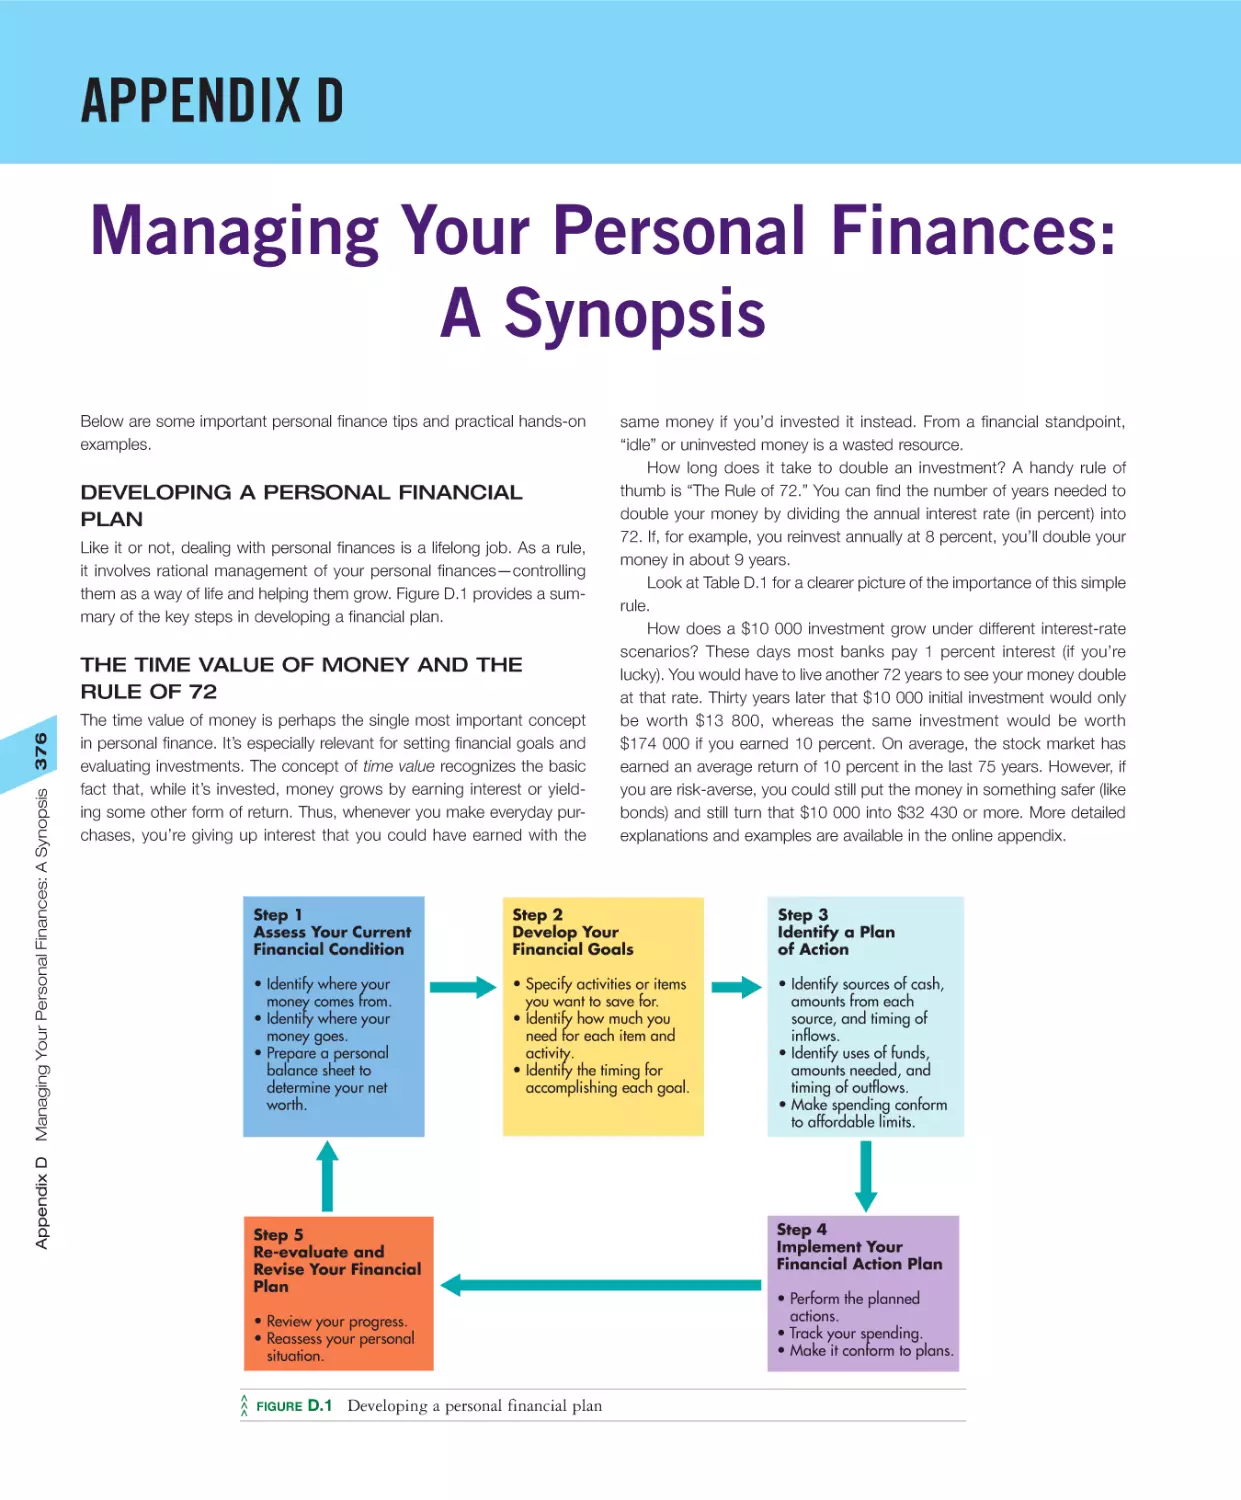 Appendix D Managing Your Personal Finances: A Synopsis